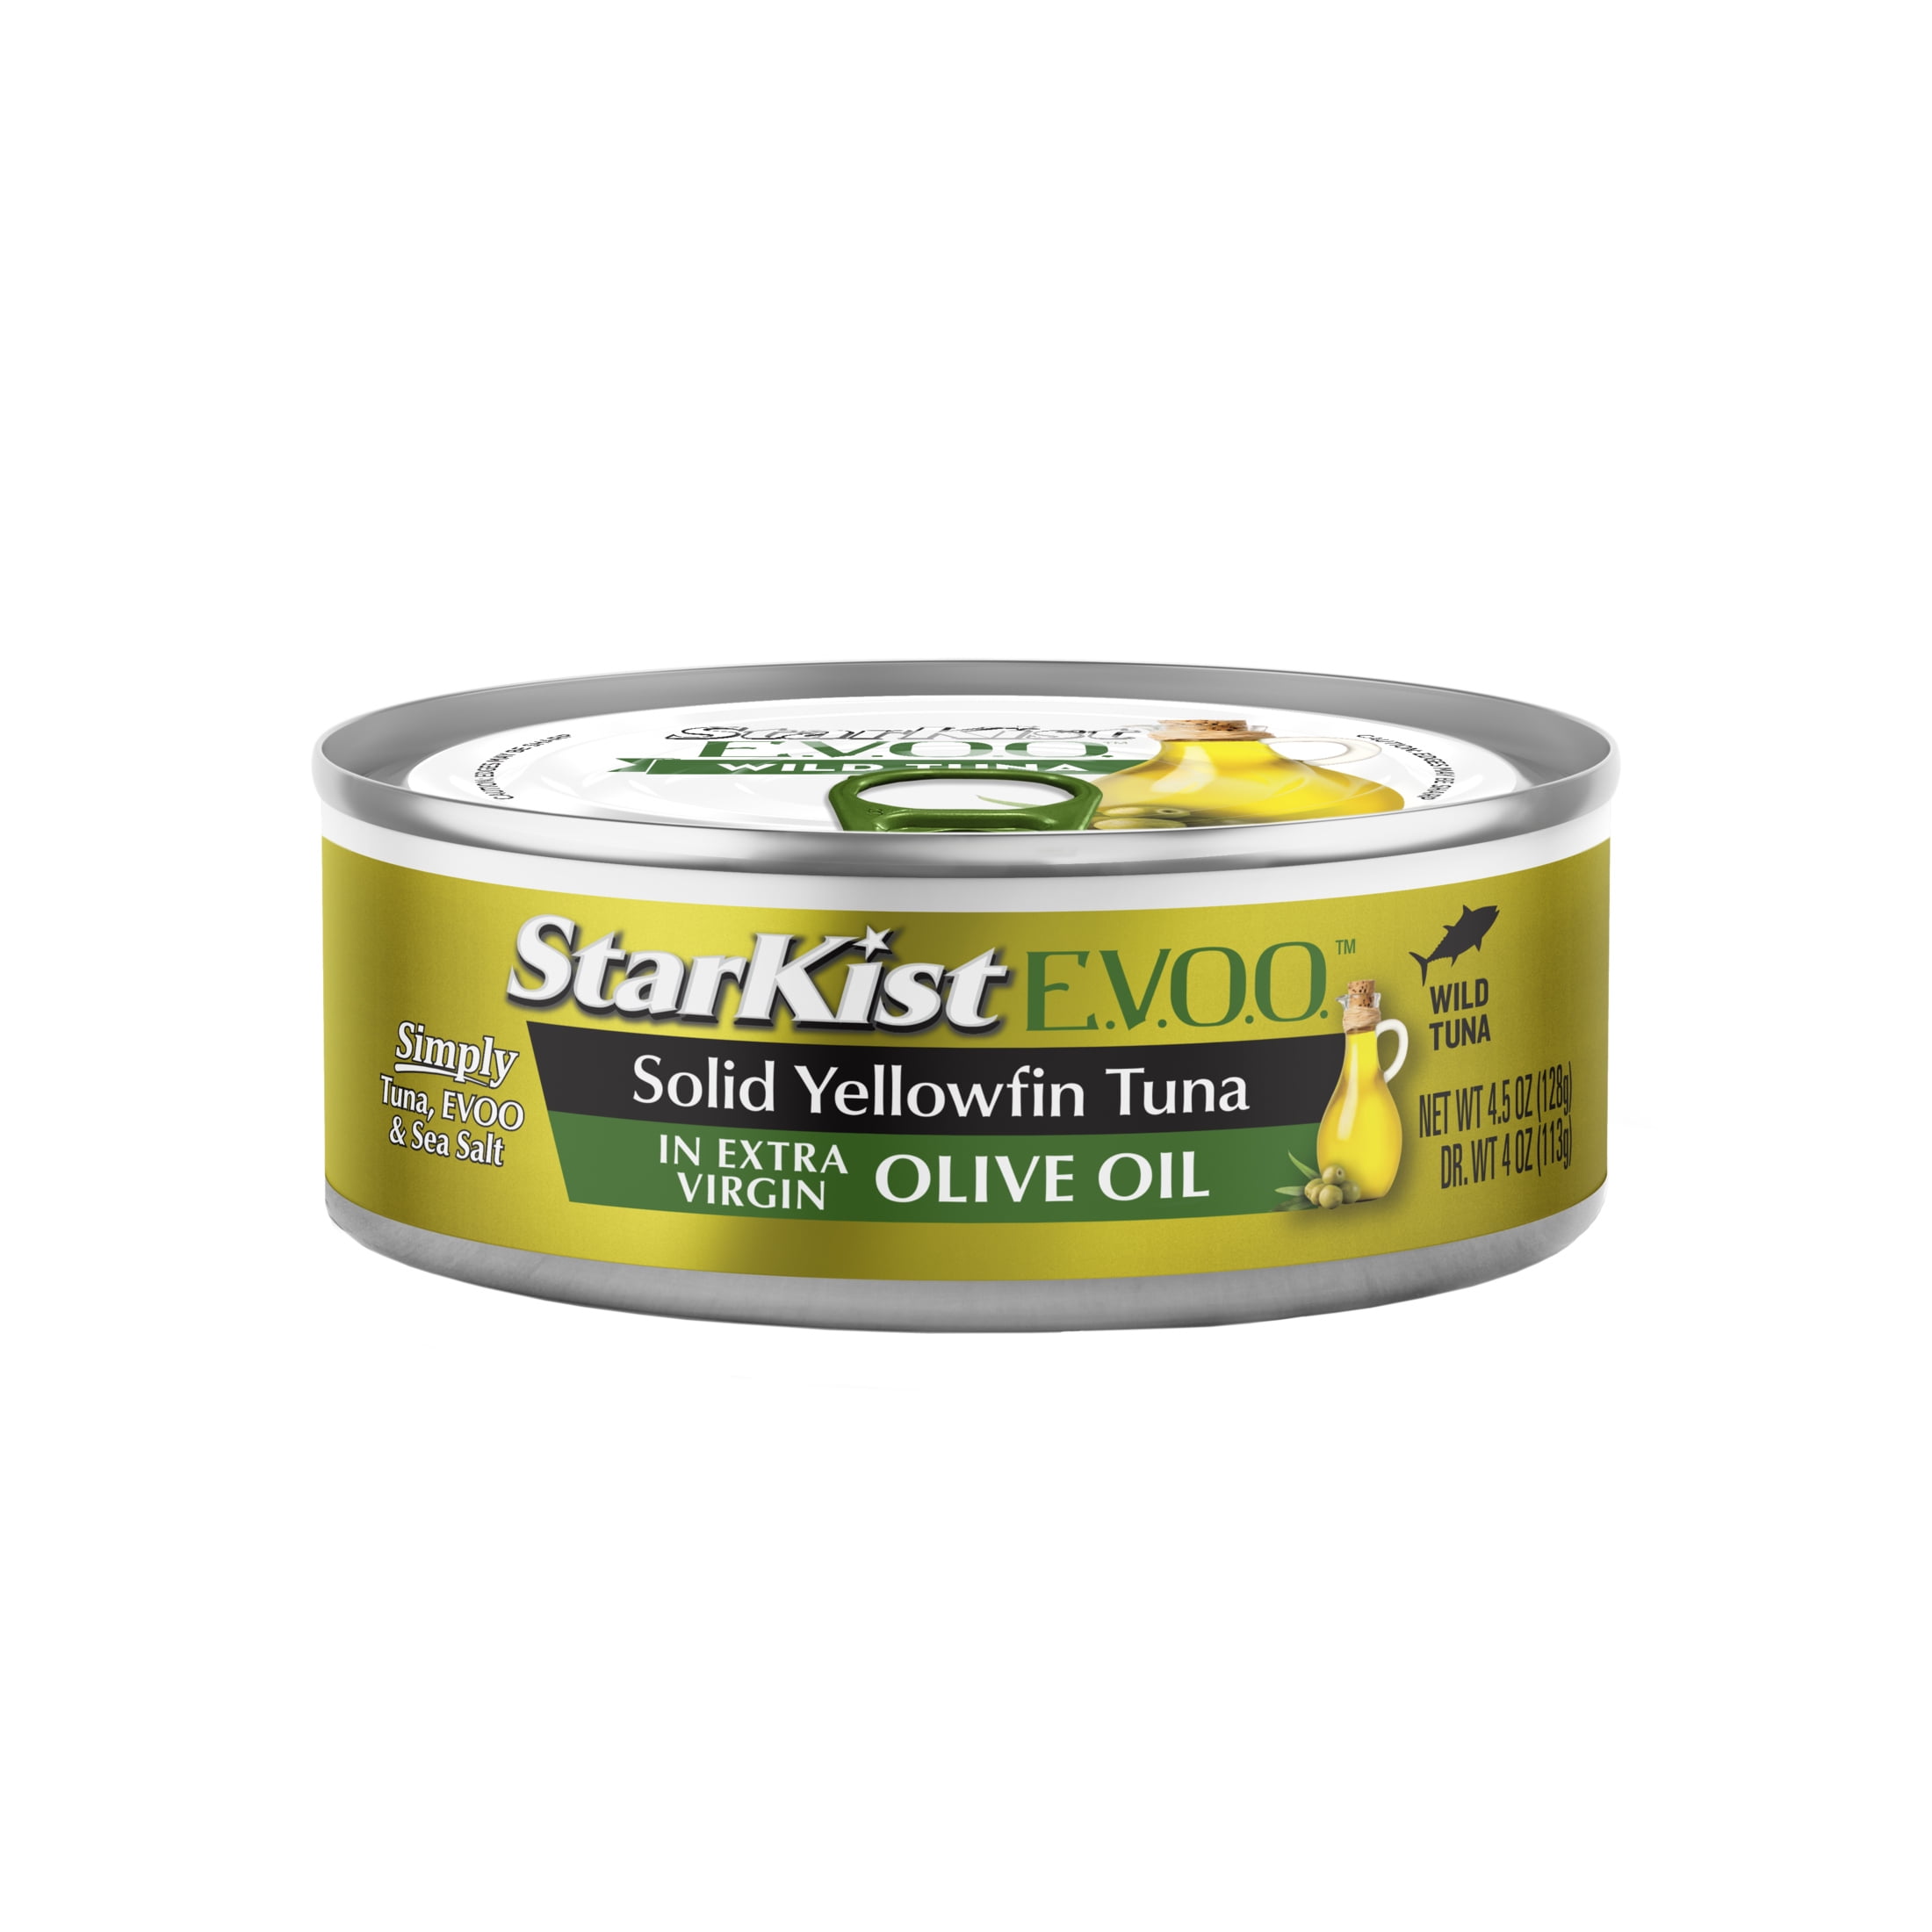 StarKist E.V.O.O. Solid Yellowfin Tuna in Extra Virgin Olive Oil, 4.5 oz Can